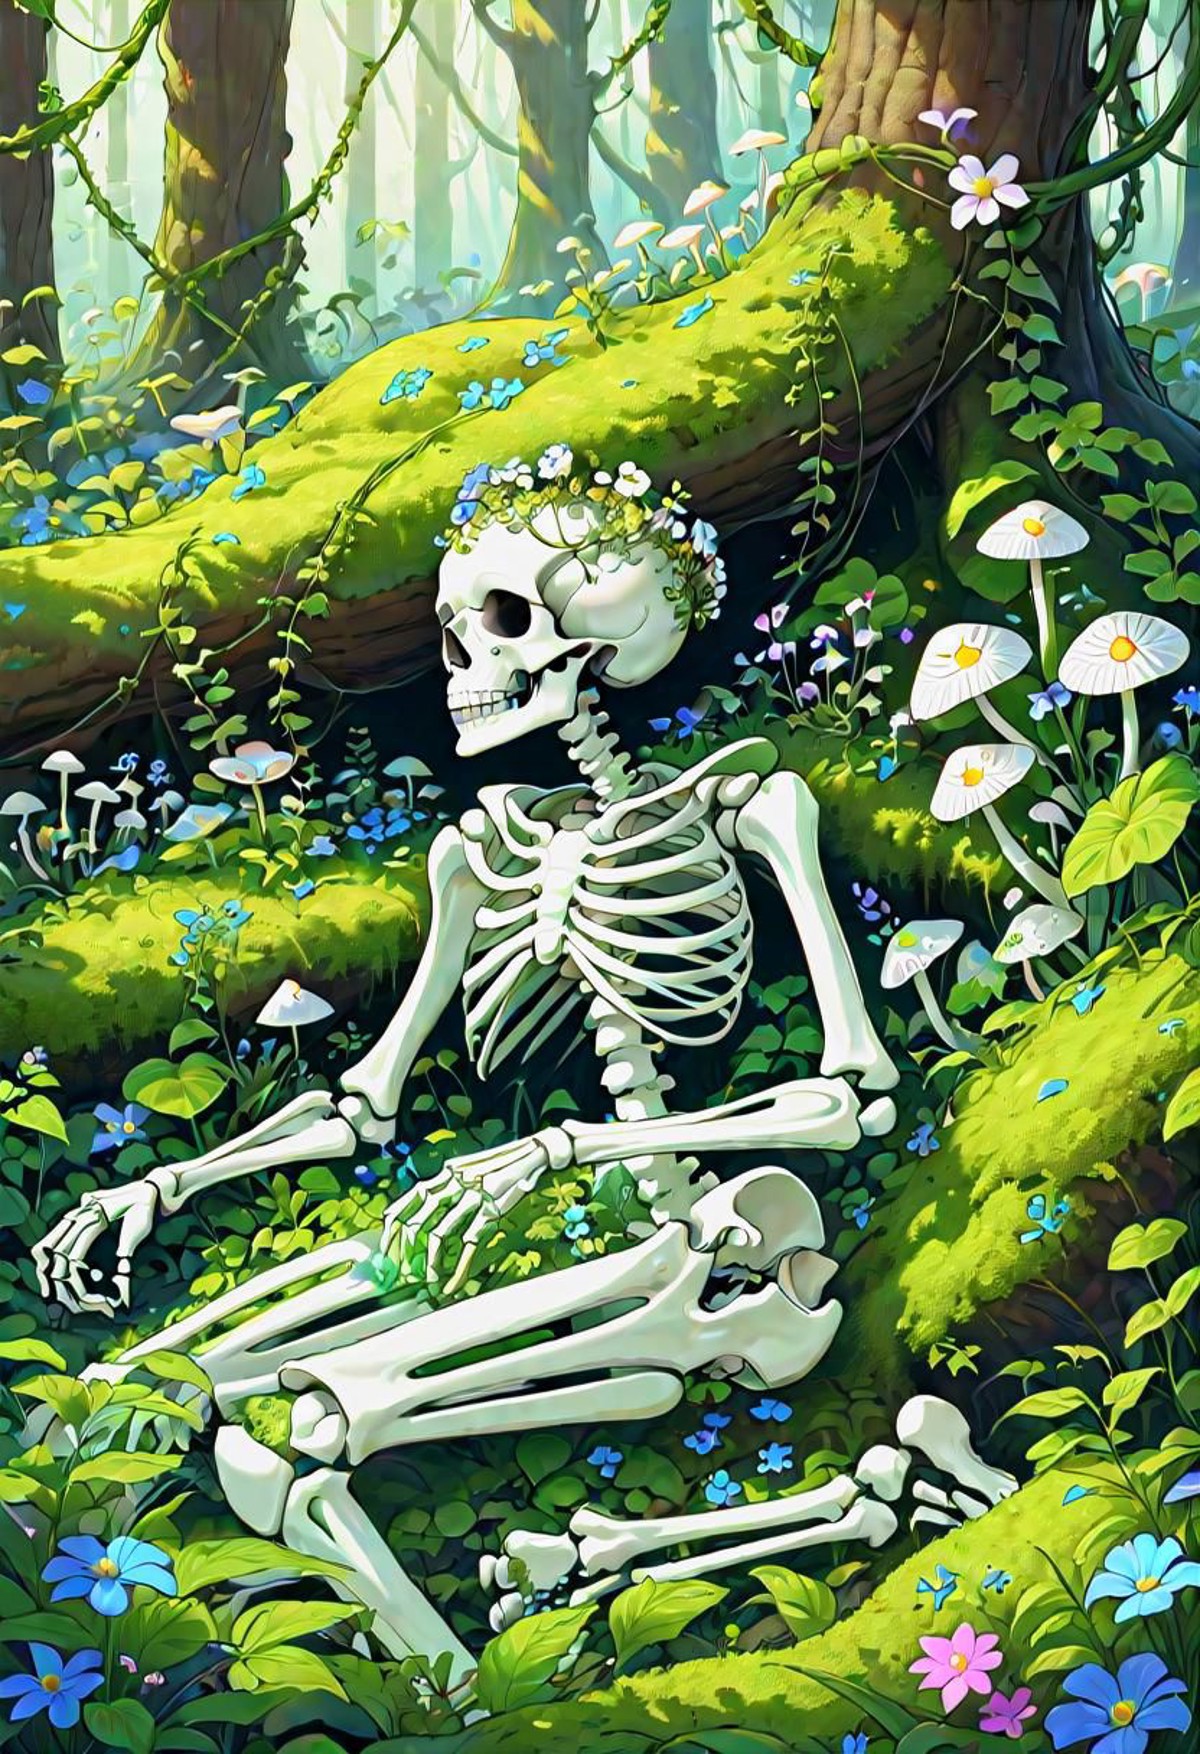 Skeleton lying on forest floor surrounded by flowers and mushrooms, flowers growing out of eye socket, vines twisted aroun...